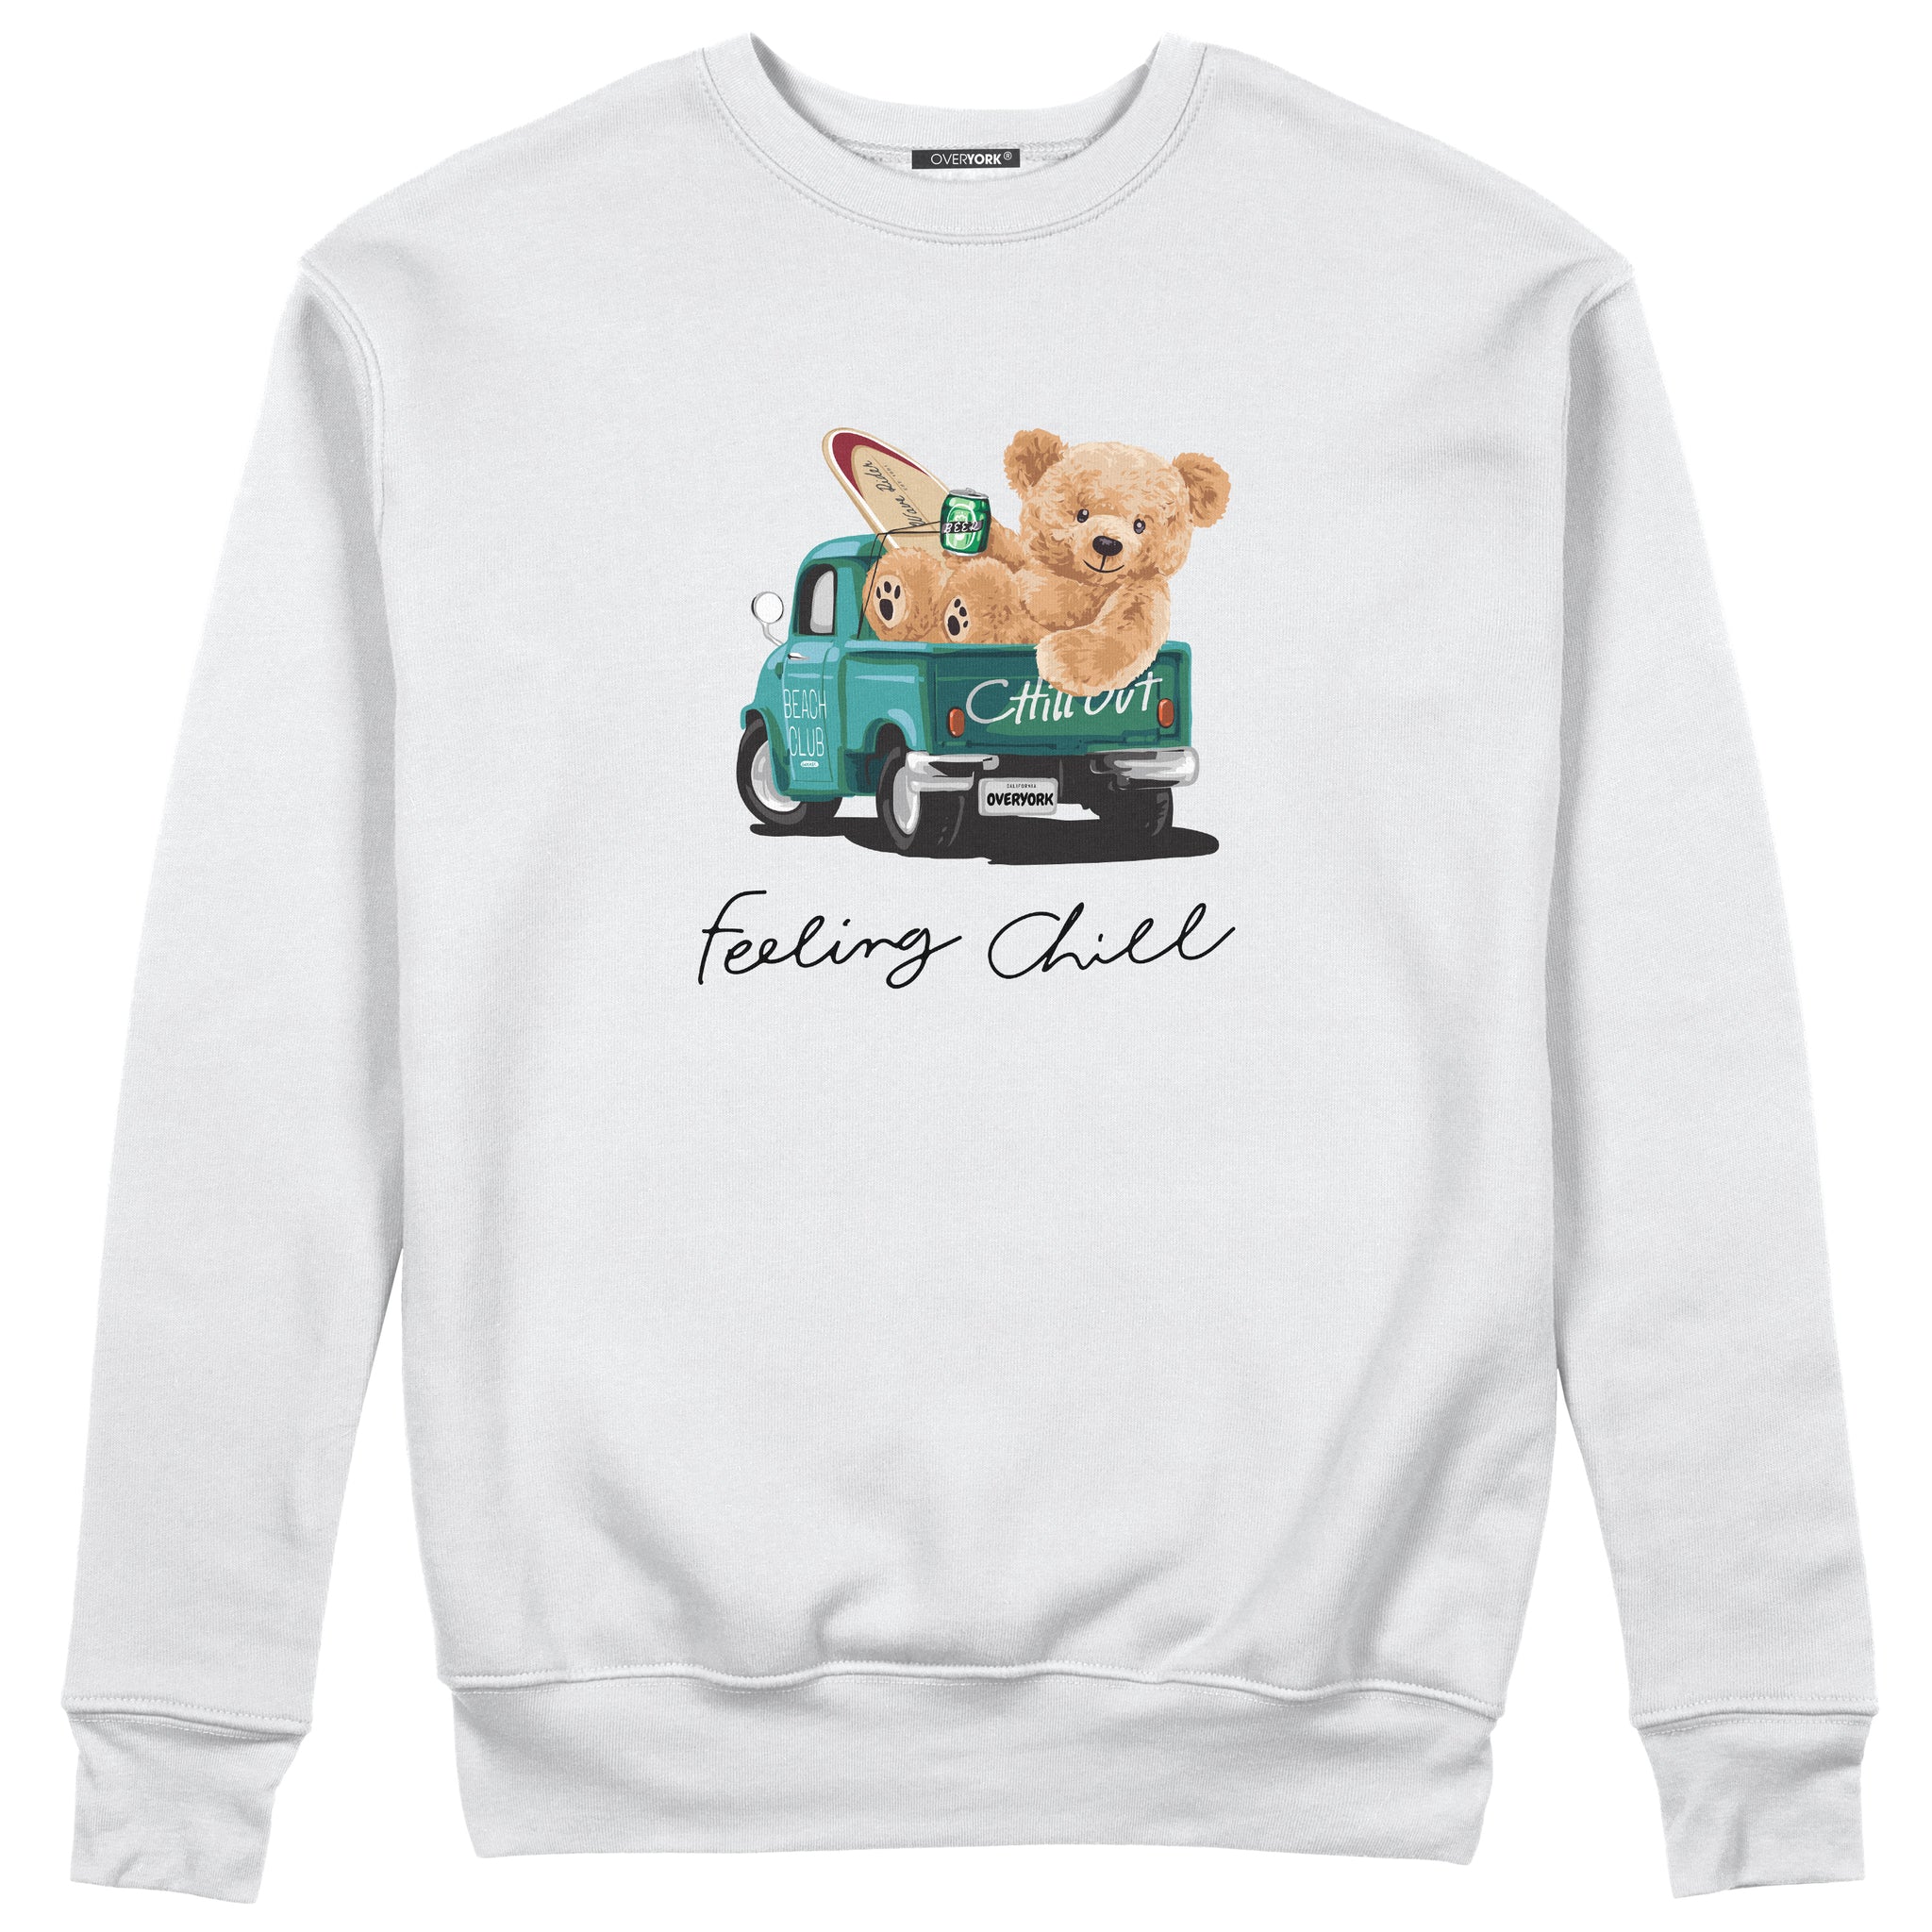 Chill Out - Sweatshirt